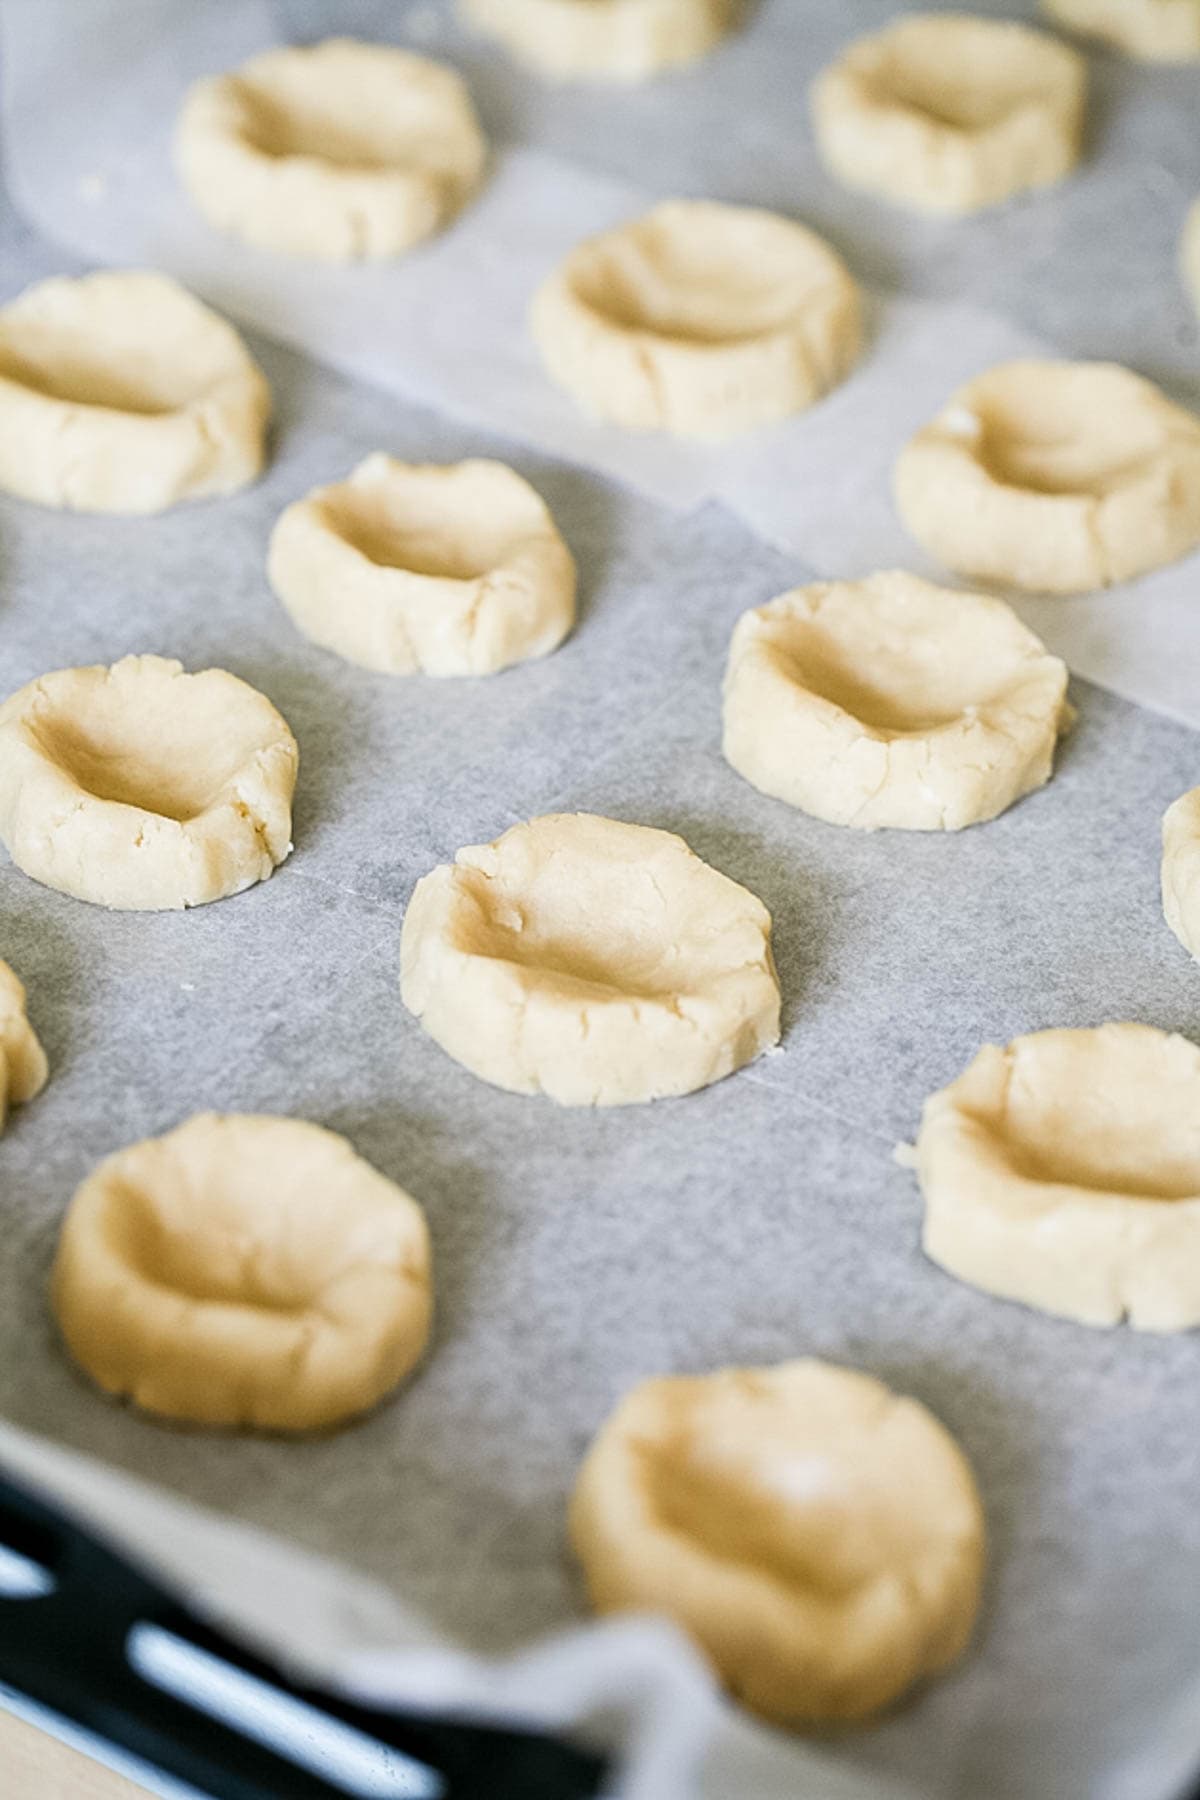 thumbprint cookies ready for filling